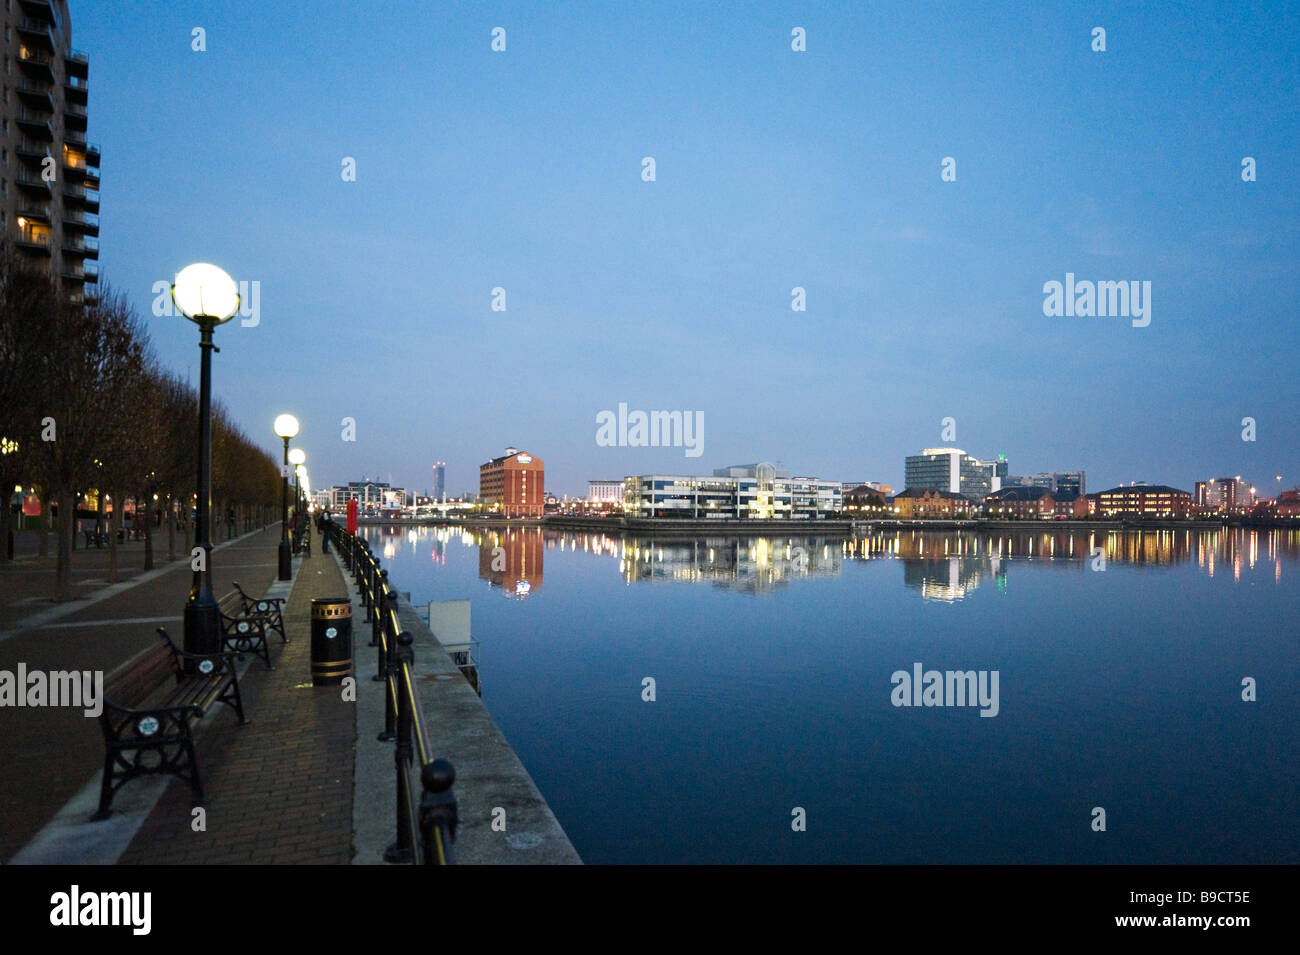 The promenade alongside the Manchester Ship Canal at dusk, Salford Quays, Greater Manchester, England Stock Photo